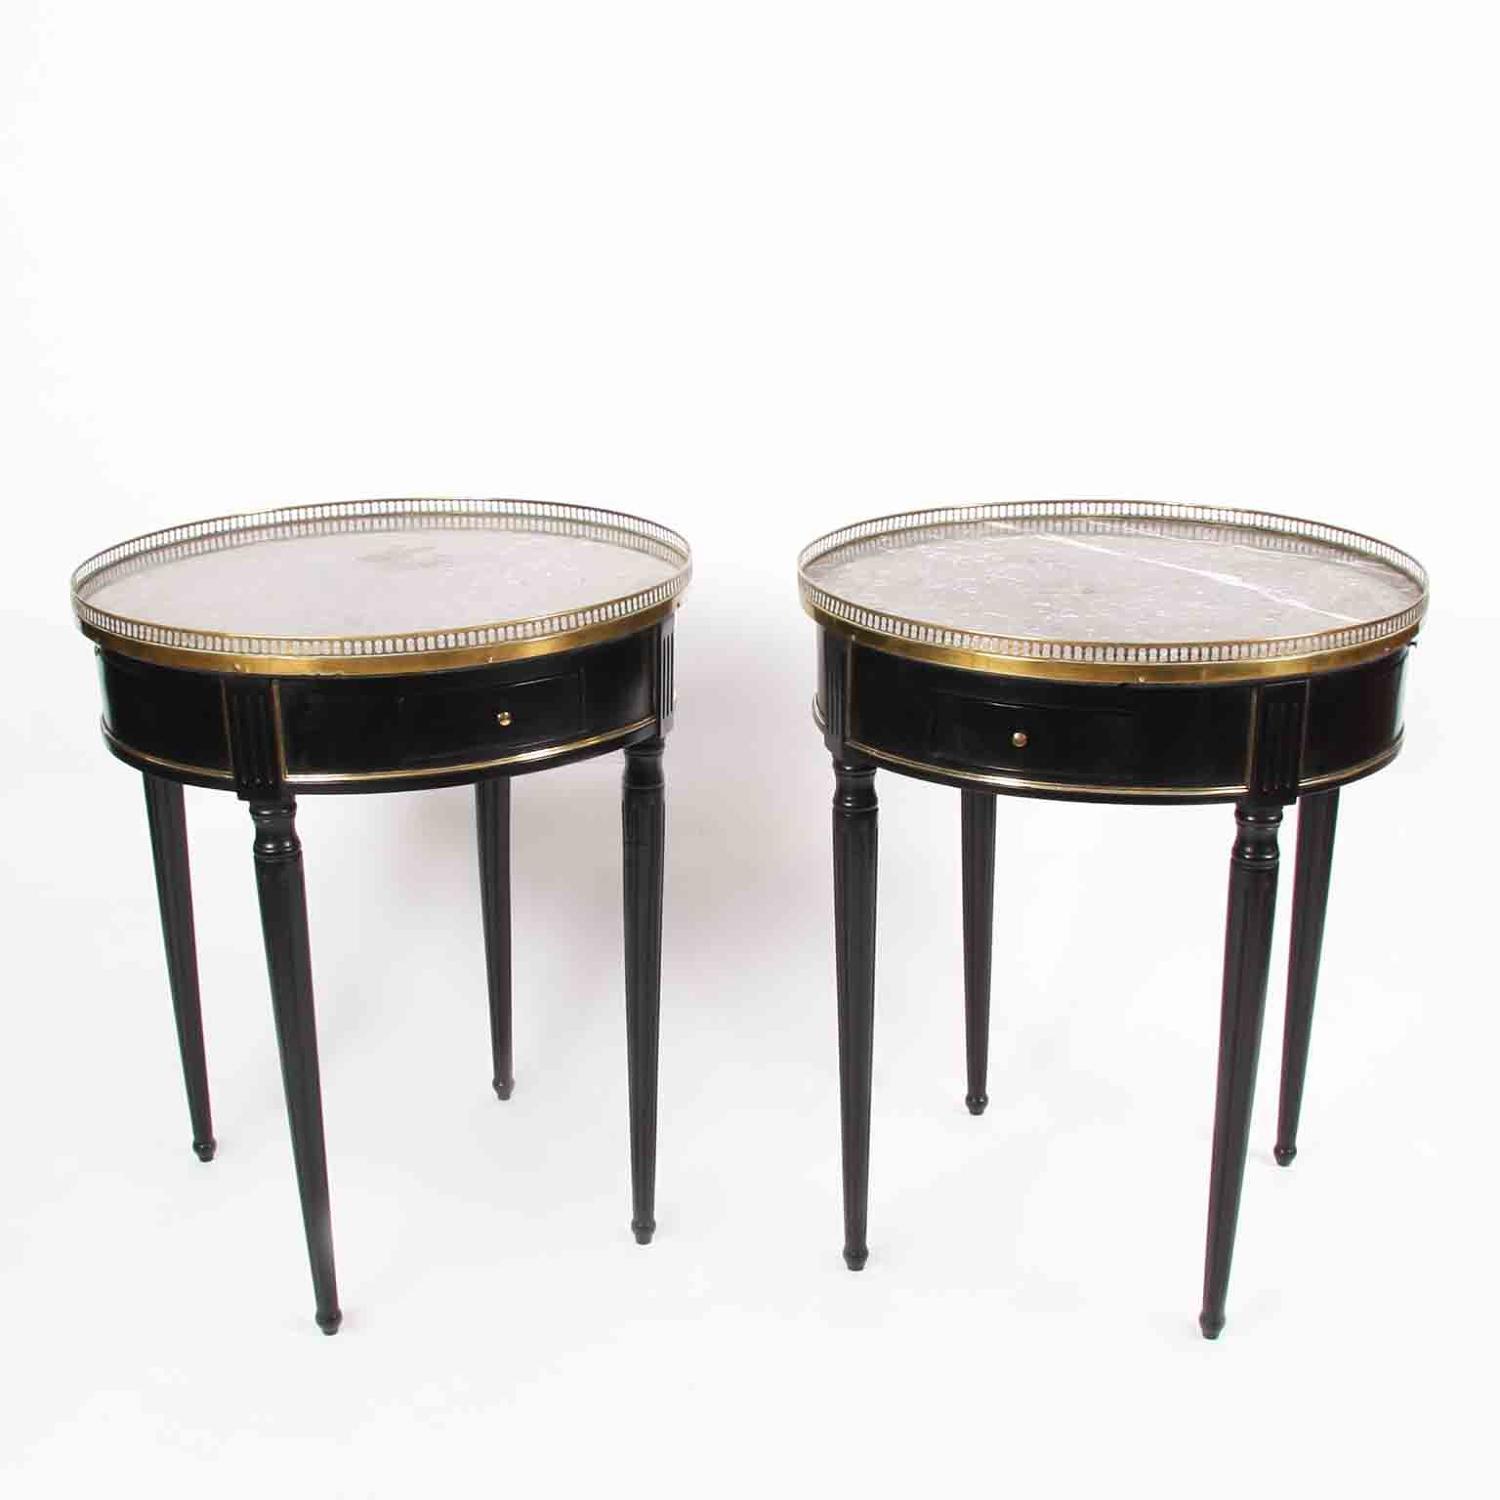 Pair of Black Bouillotte Tables with Marble Tops